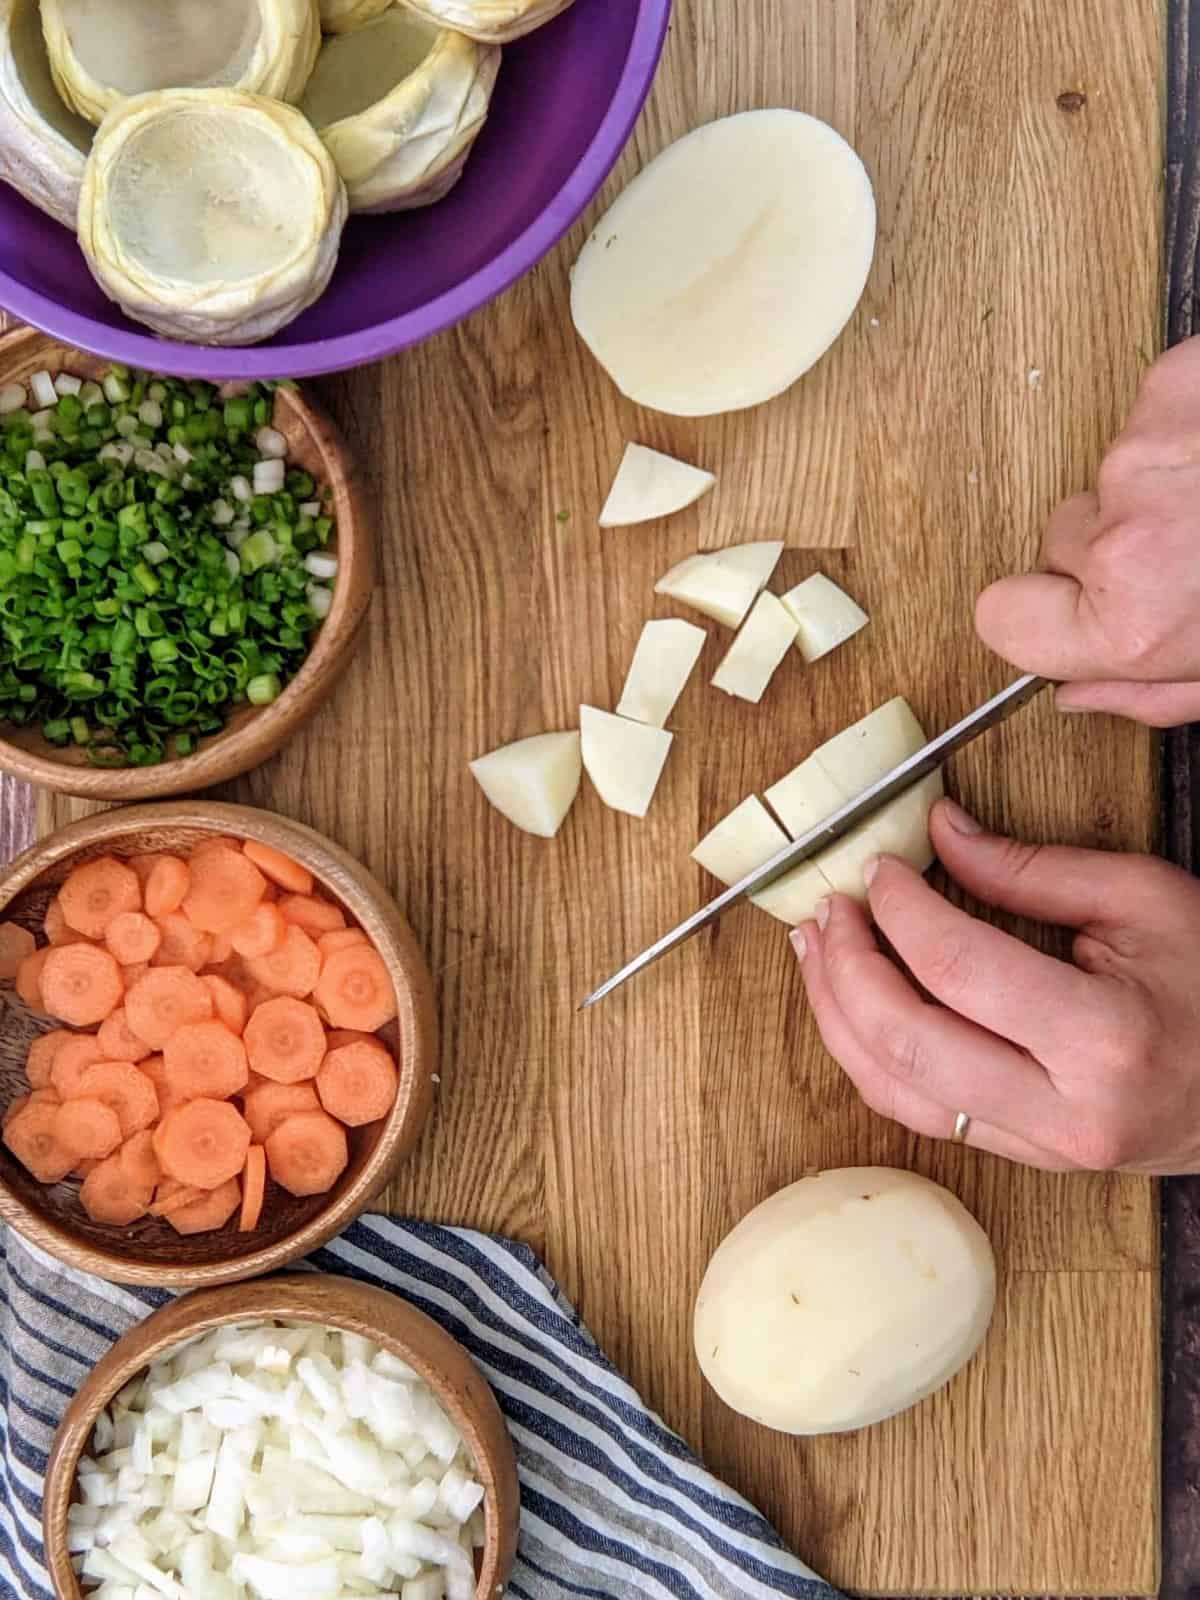 Chopping potatoes in dices for artichoke stew.